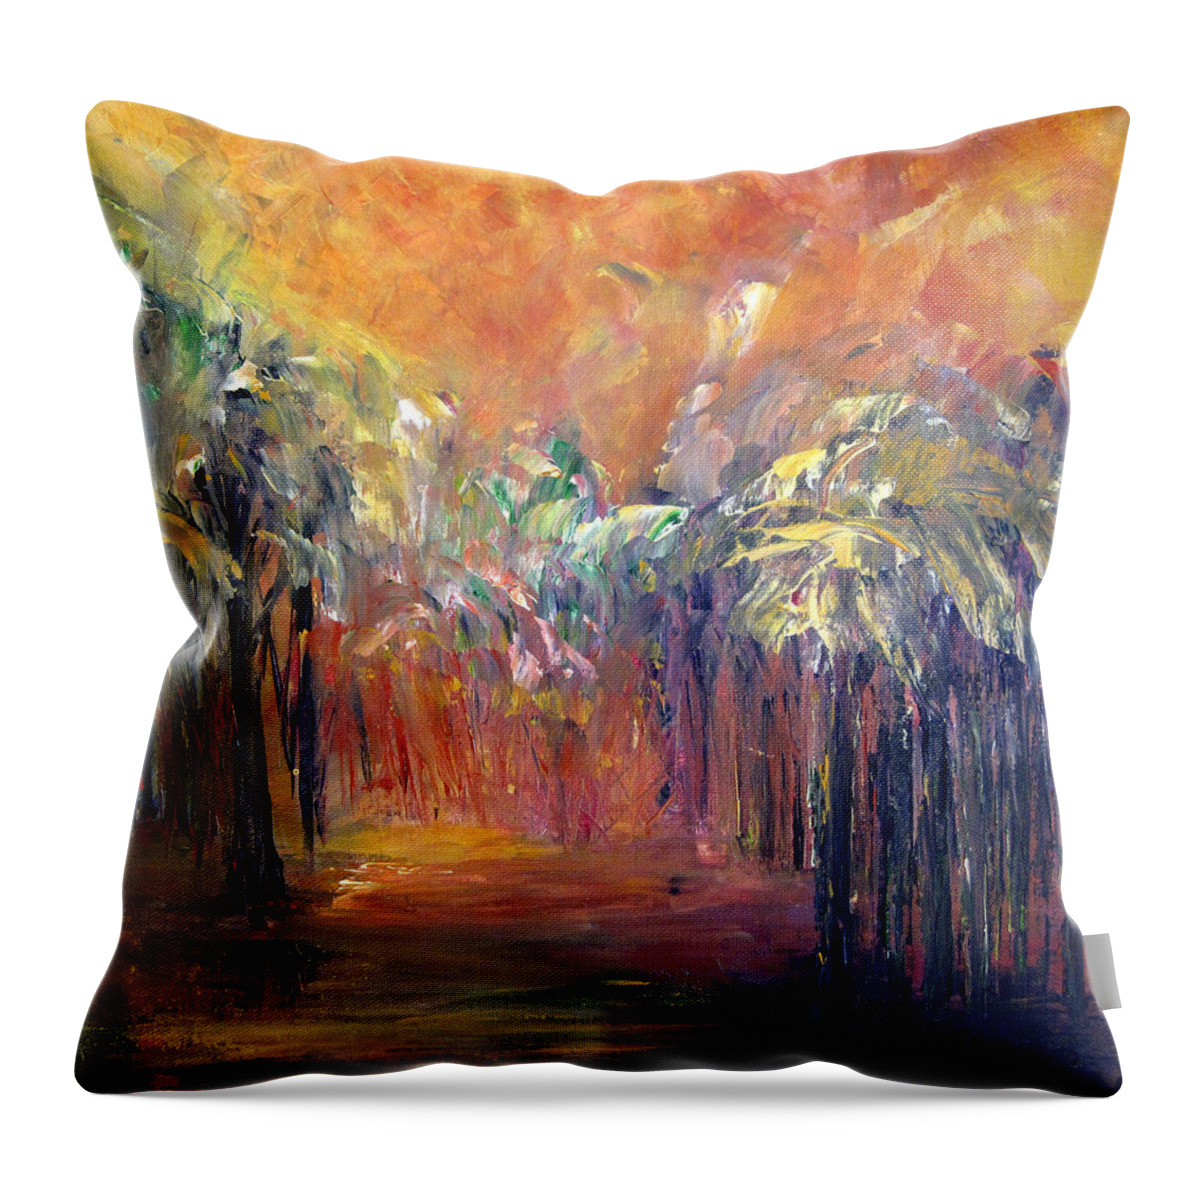 Palms Throw Pillow featuring the painting Palm Passage by Roberta Rotunda